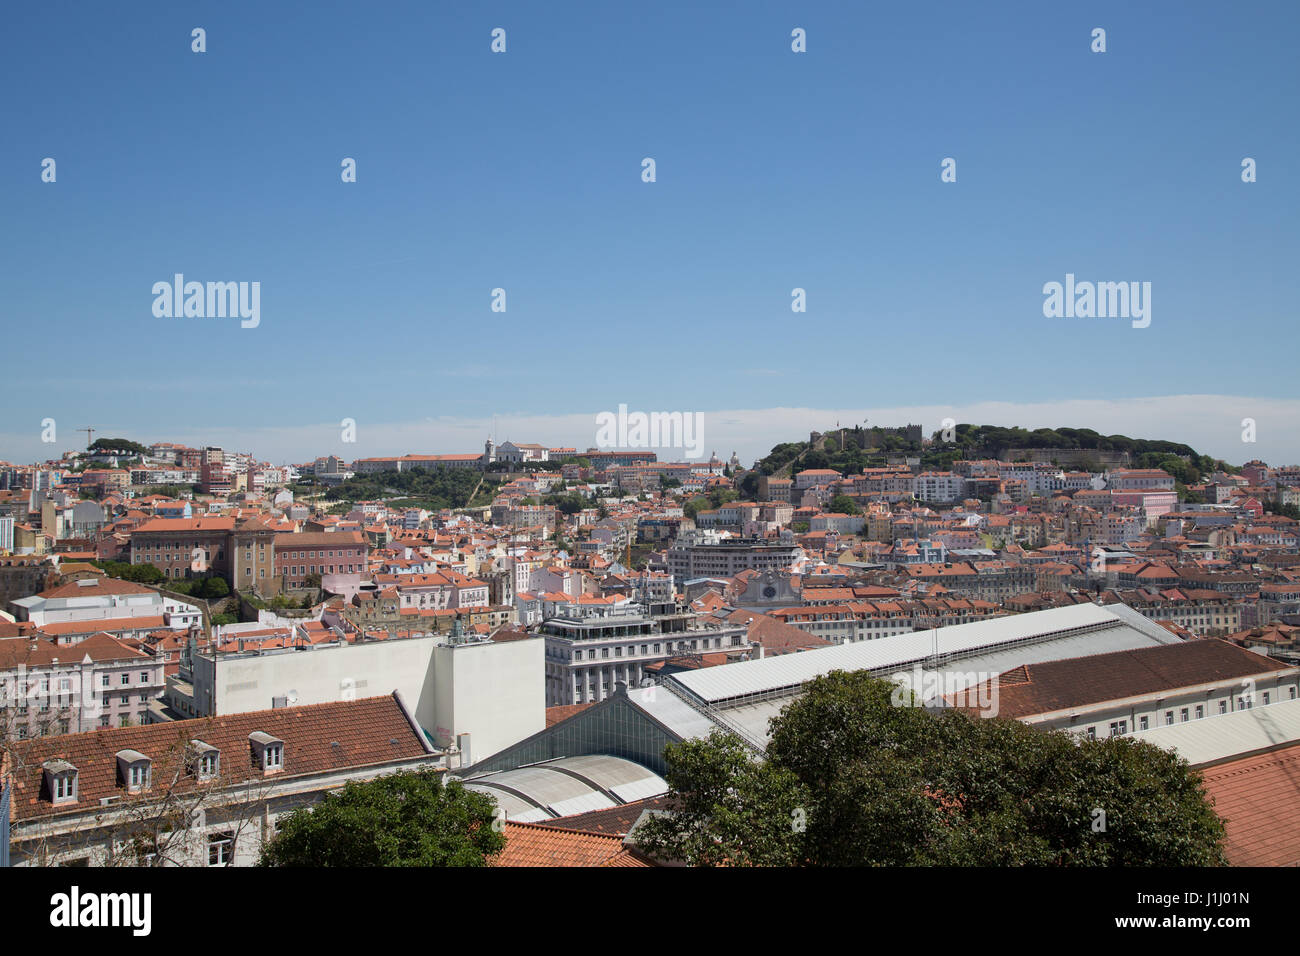 A view over the city of Lisbon, Portugal. Stock Photo